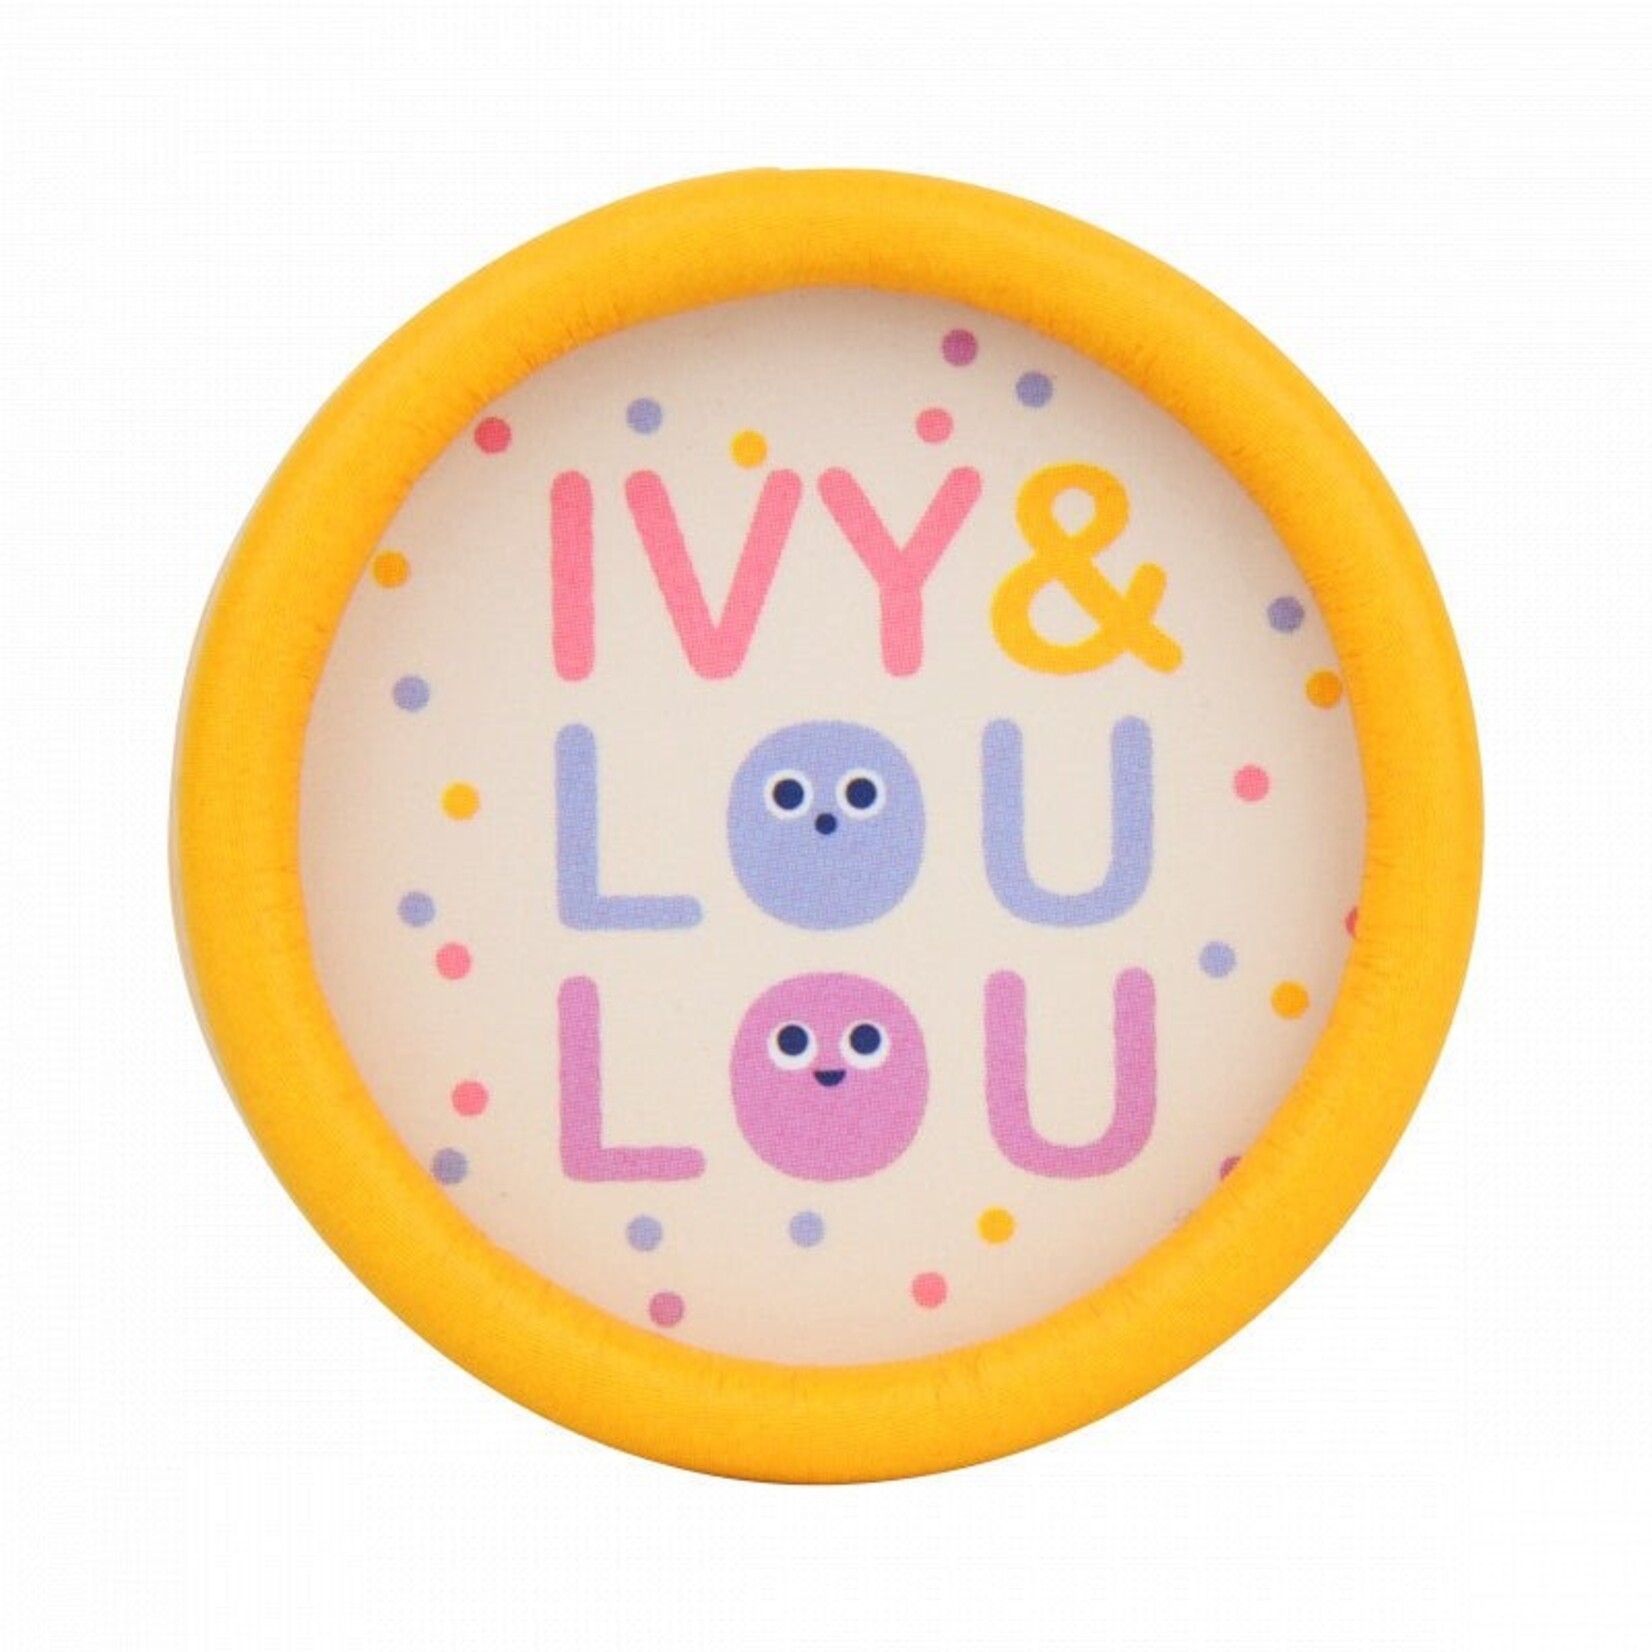 Ivy & Loulou Natural Play Makeup Fairydust Gold